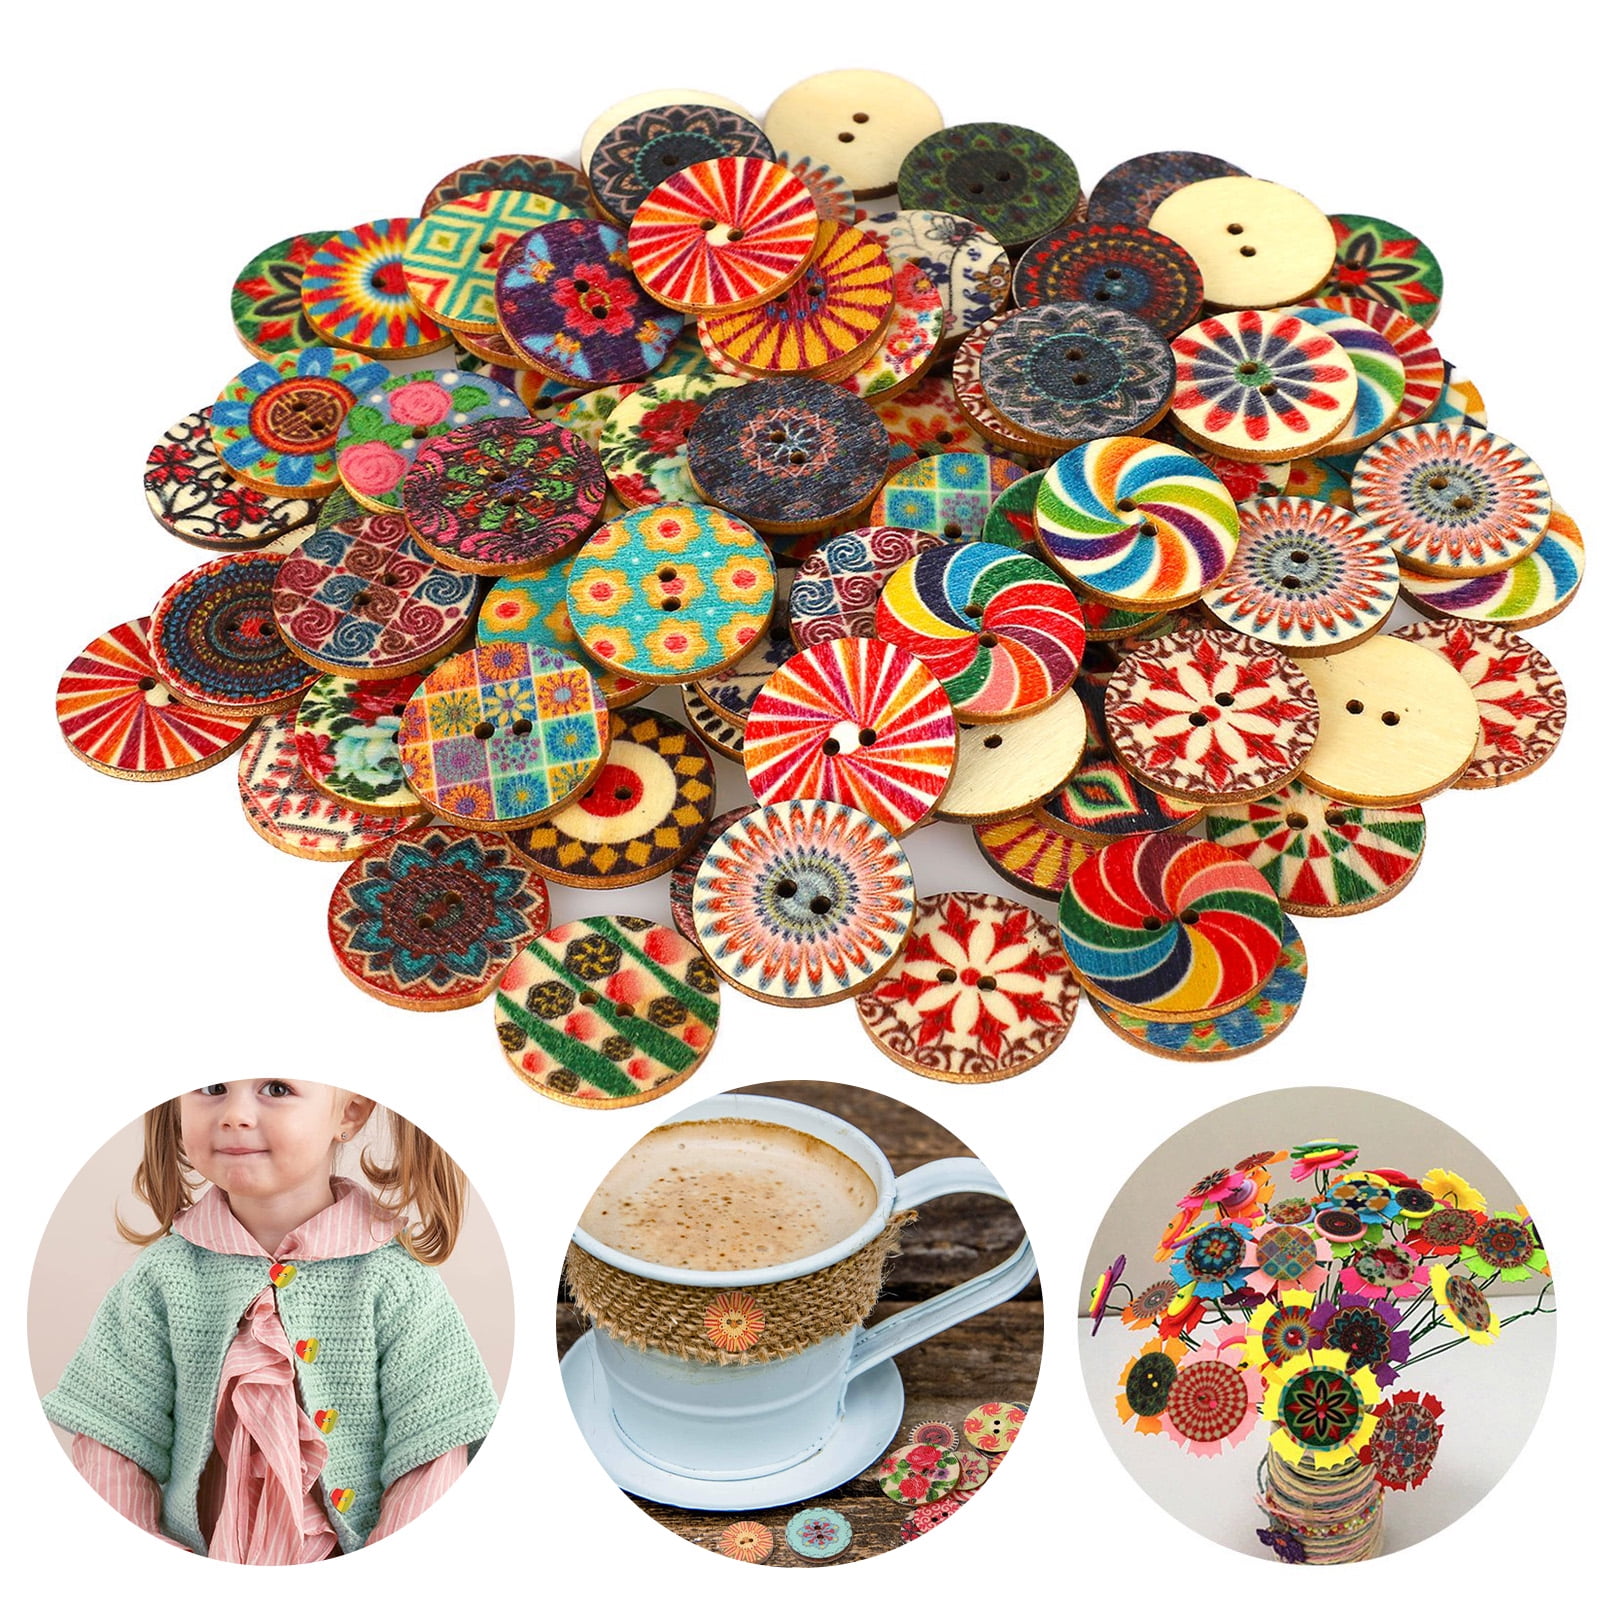 50 Pcs Vintage Peony Print Round Wooden Sewing Buttons Bulk